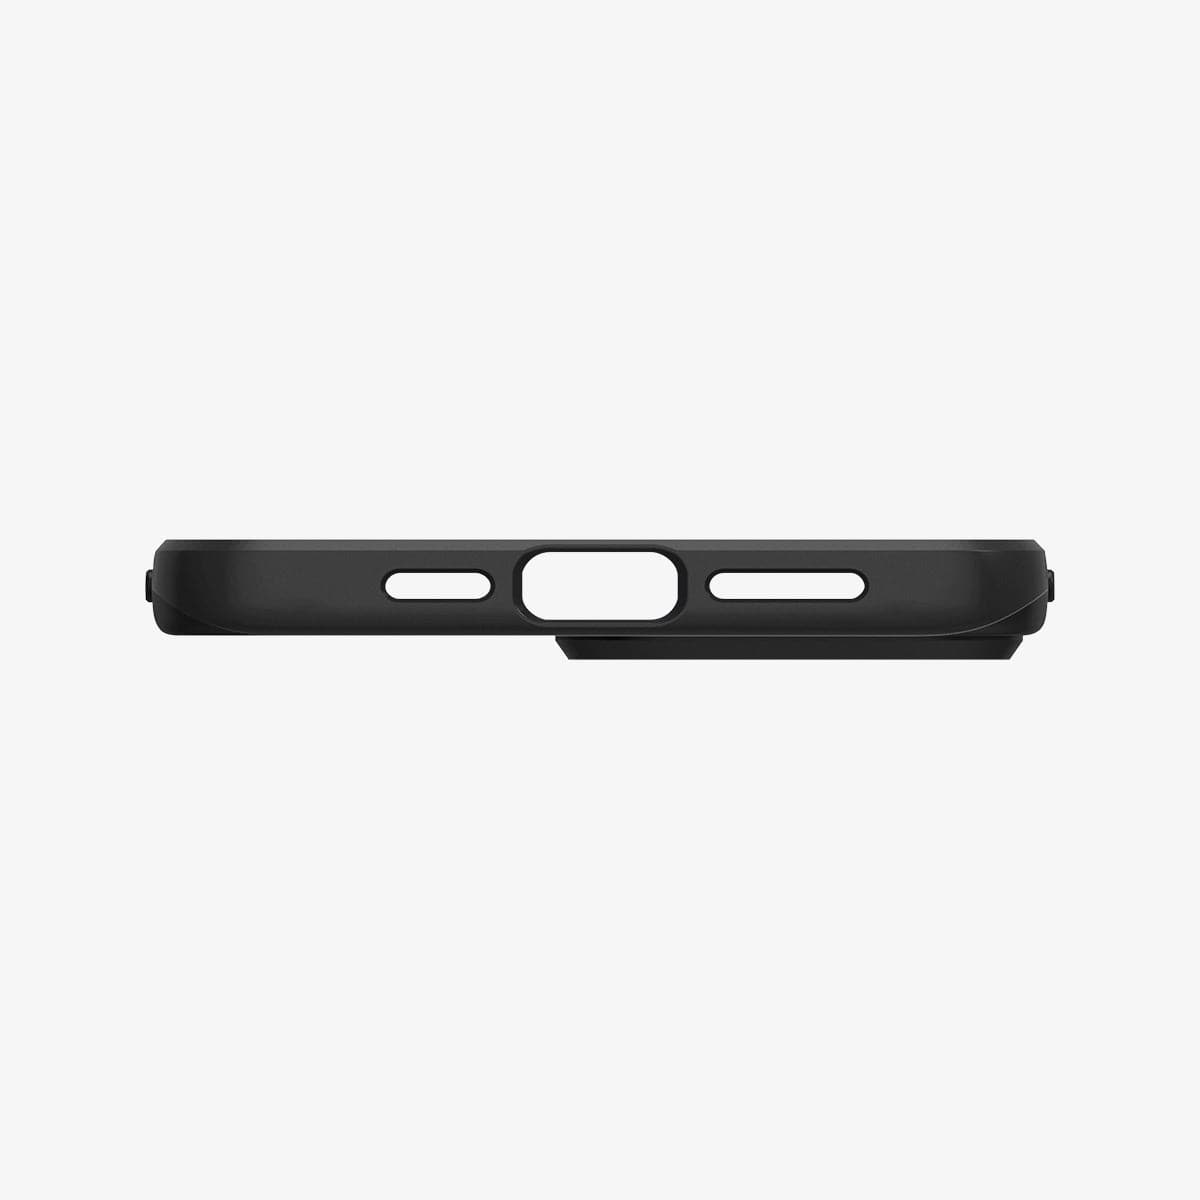 ACS03674 - iPhone 13 Pro Max Case Thin Fit in black showing the bottom with precise cutouts